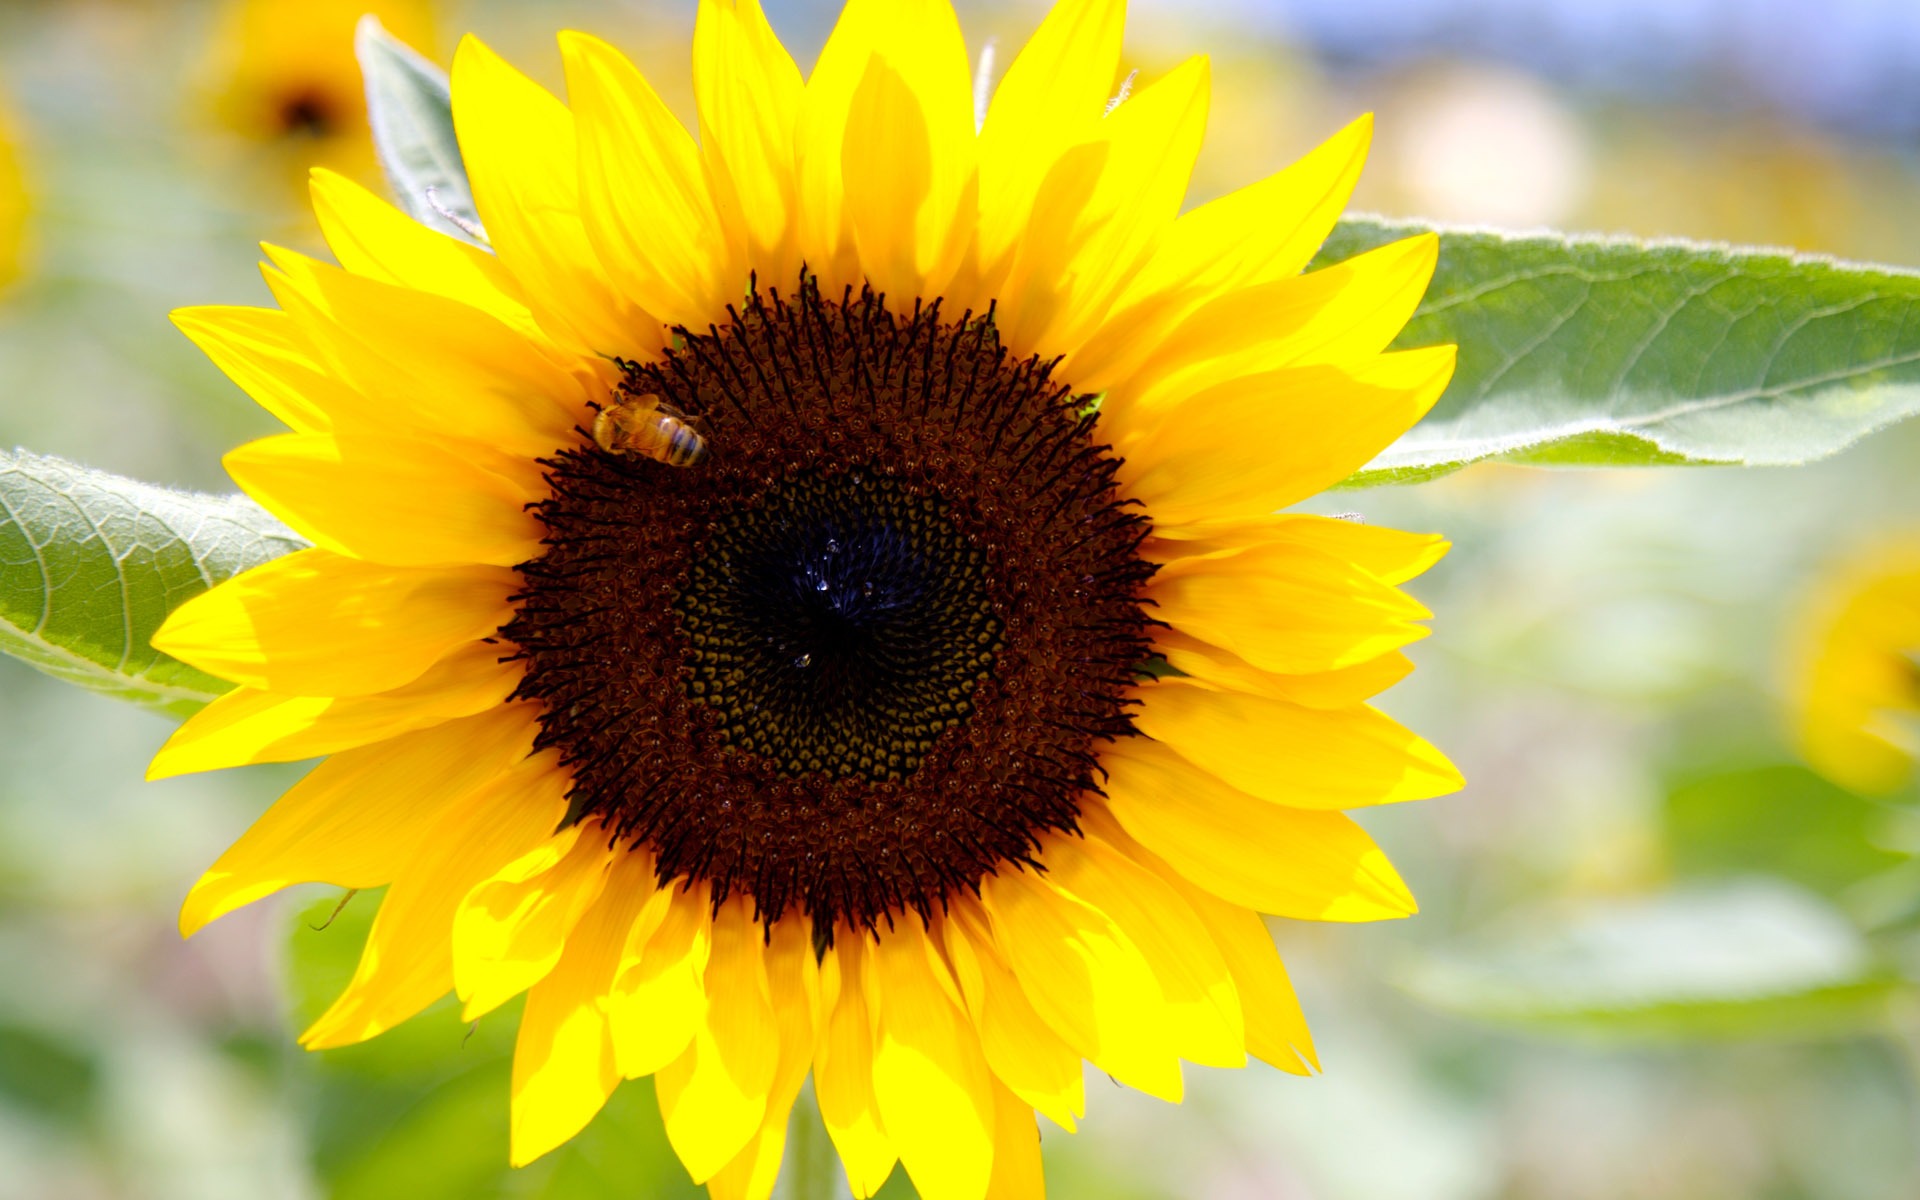 Sunny sunflower photo HD Wallpapers #22 - 1920x1200